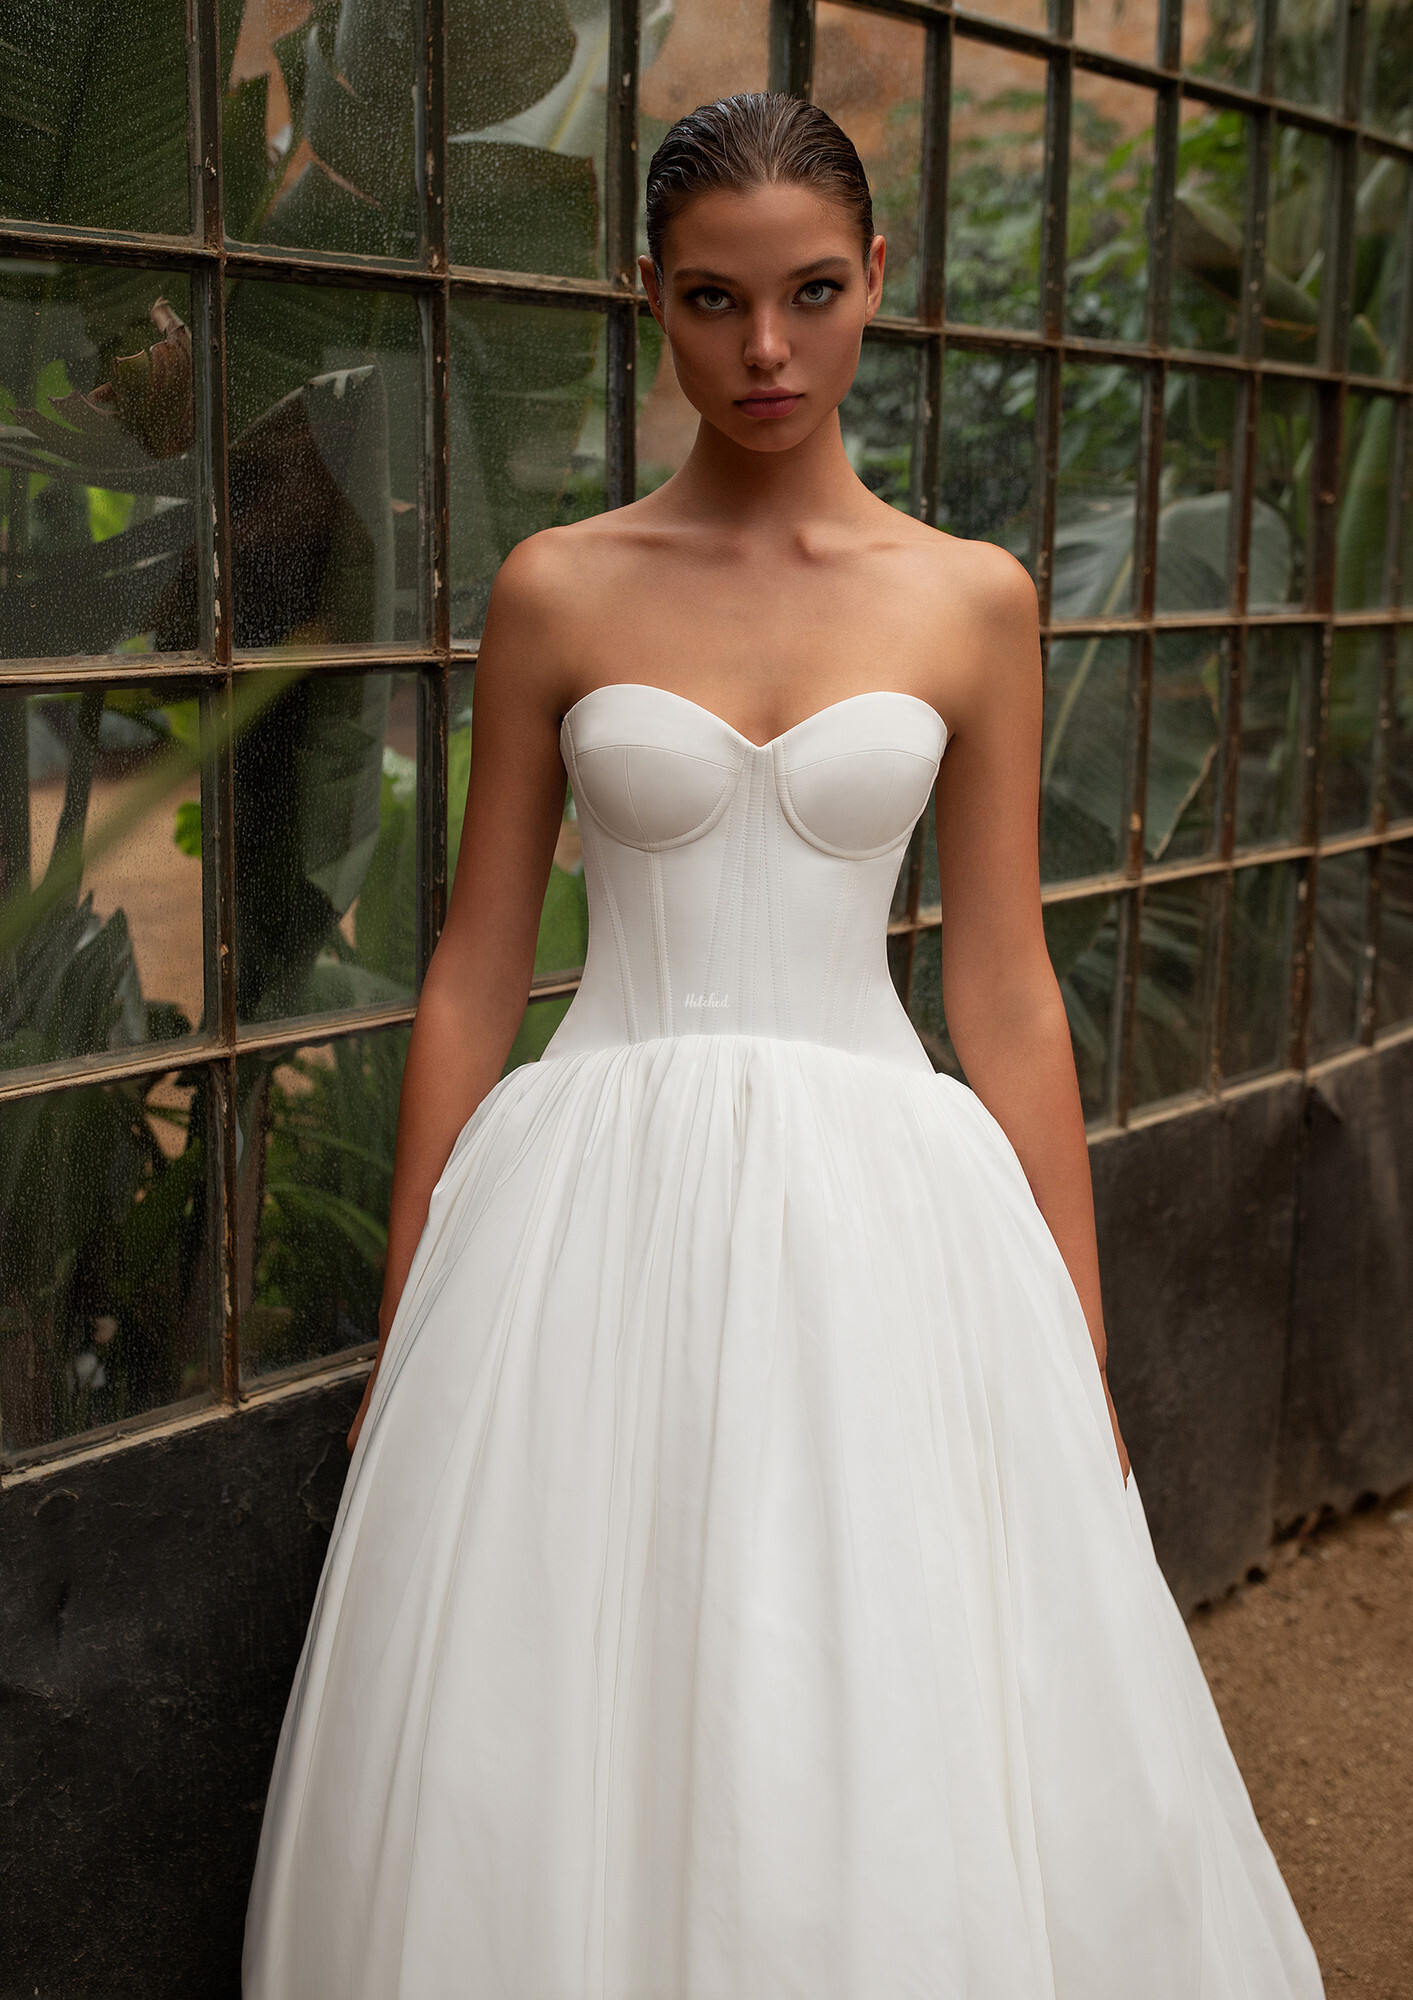 COCO Wedding Dress from White One - hitched.co.uk